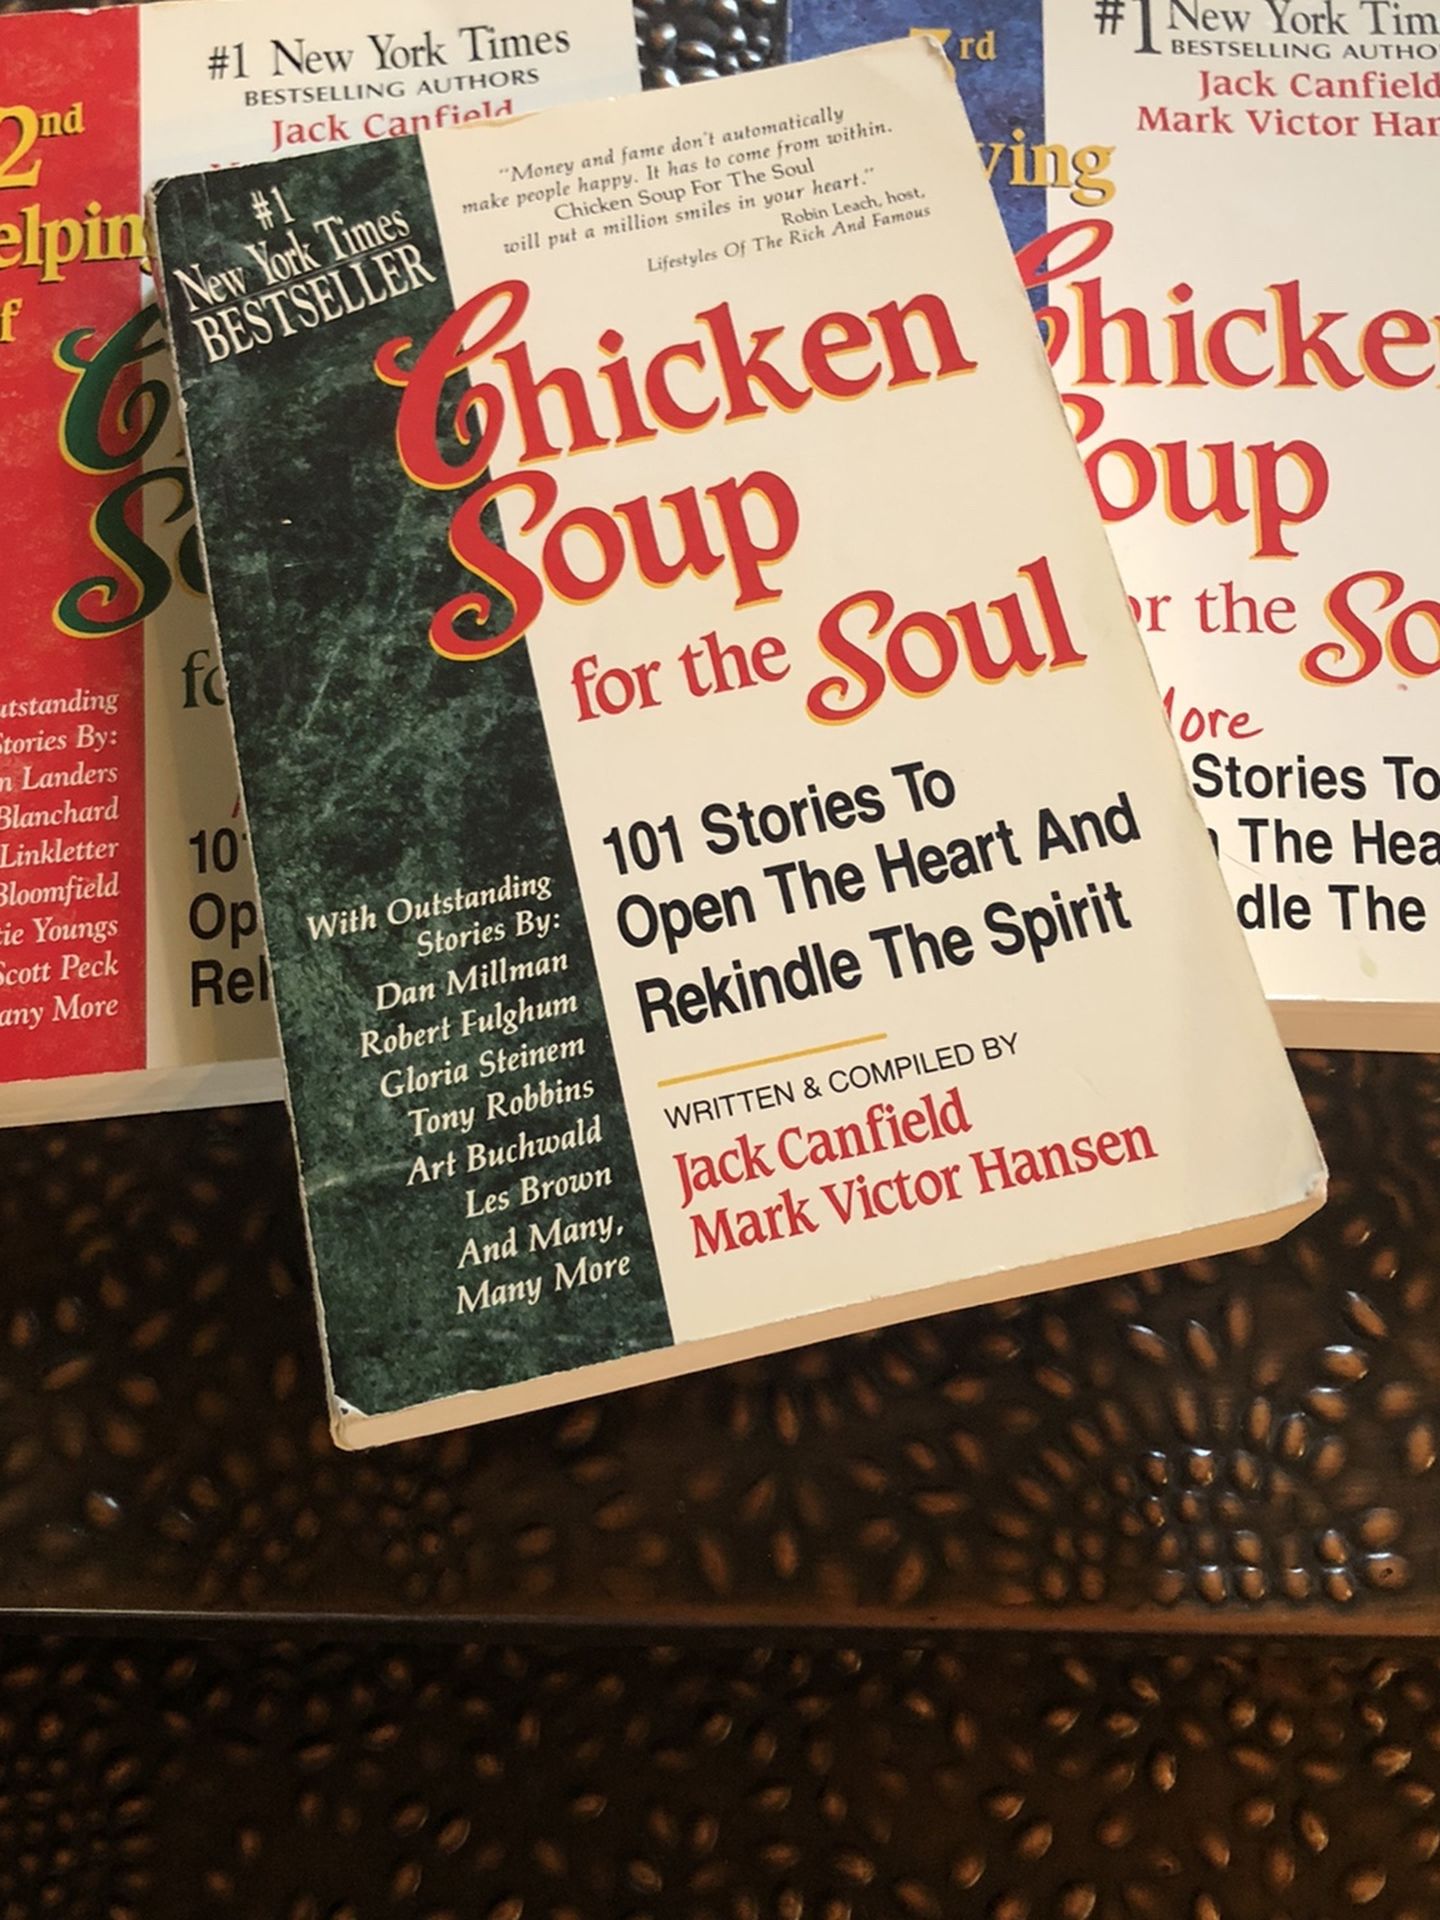 Chicken Soup For The Soul Vol 1-3